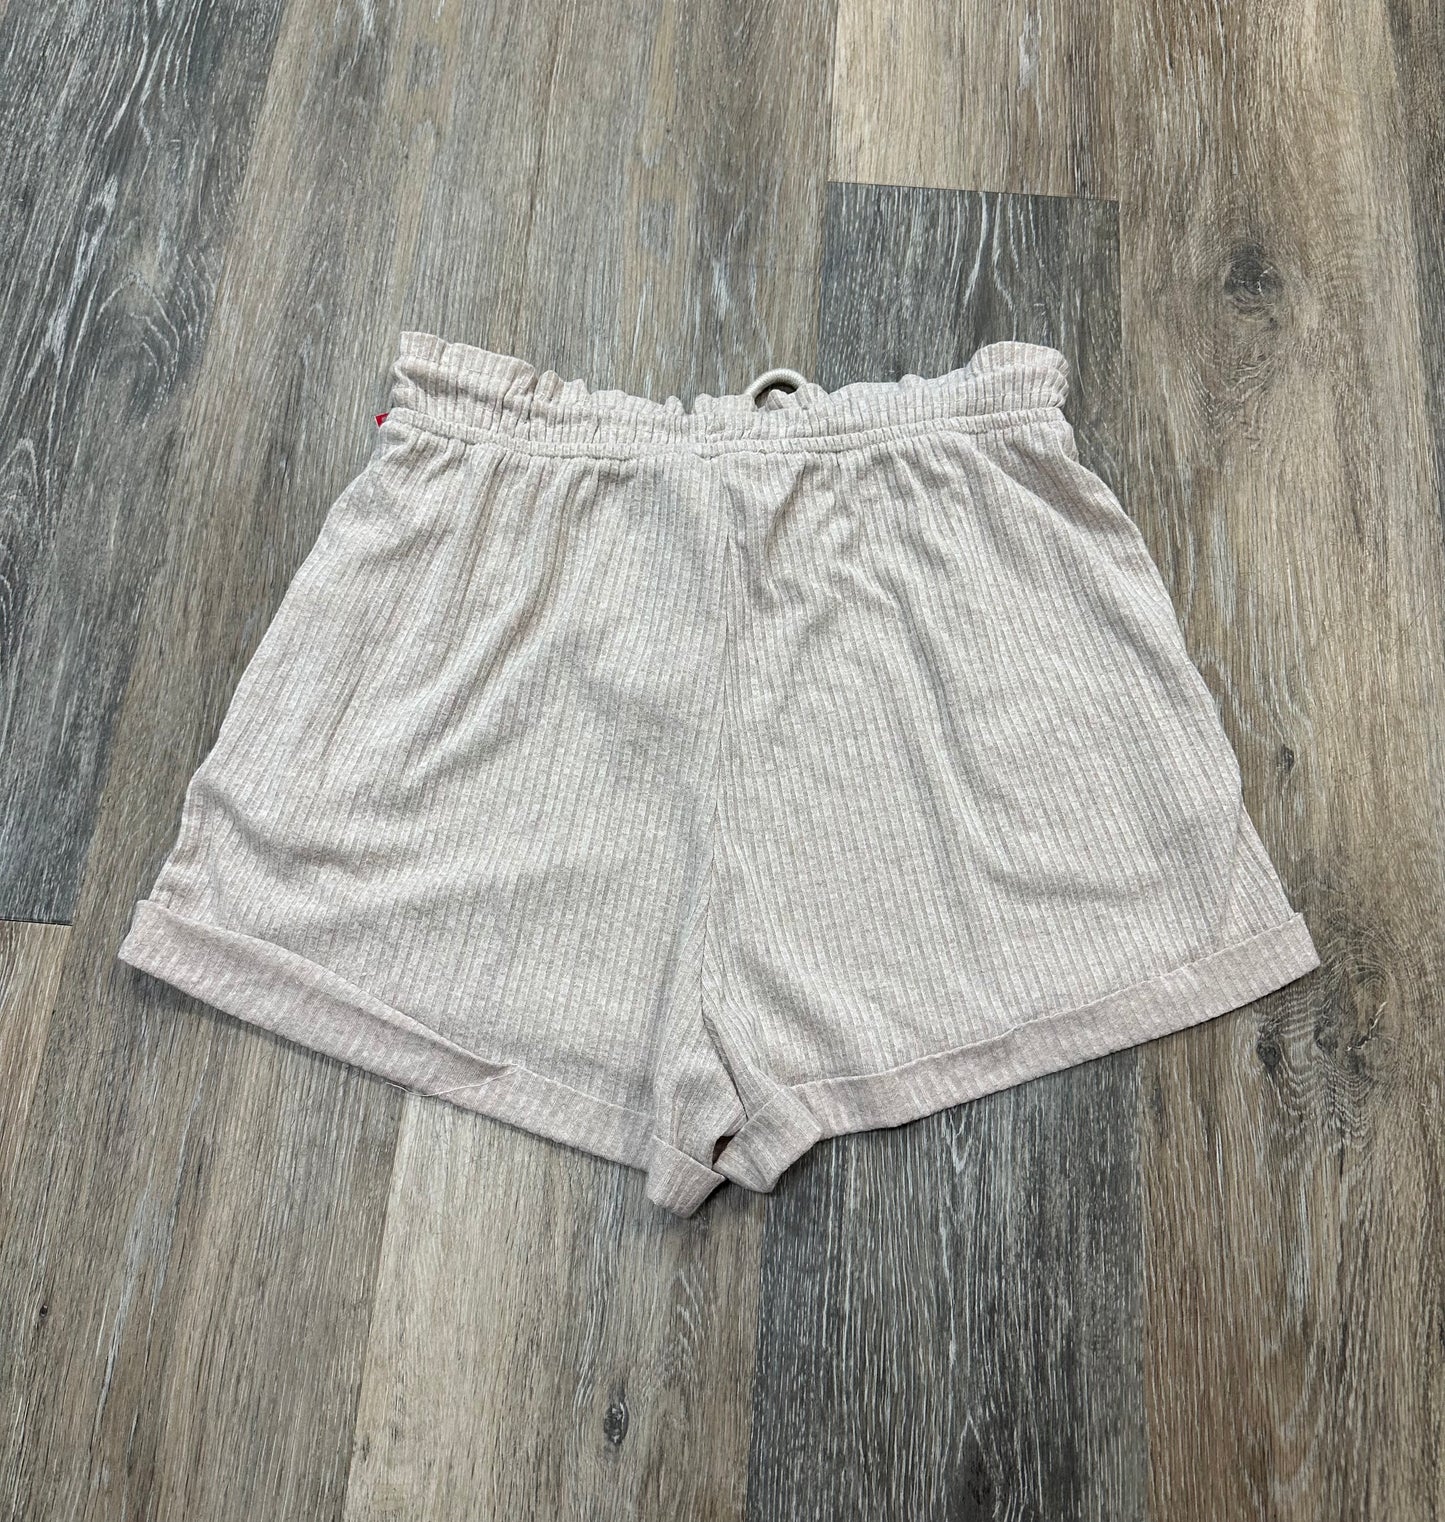 Shorts By Princess Polly  Size: 2